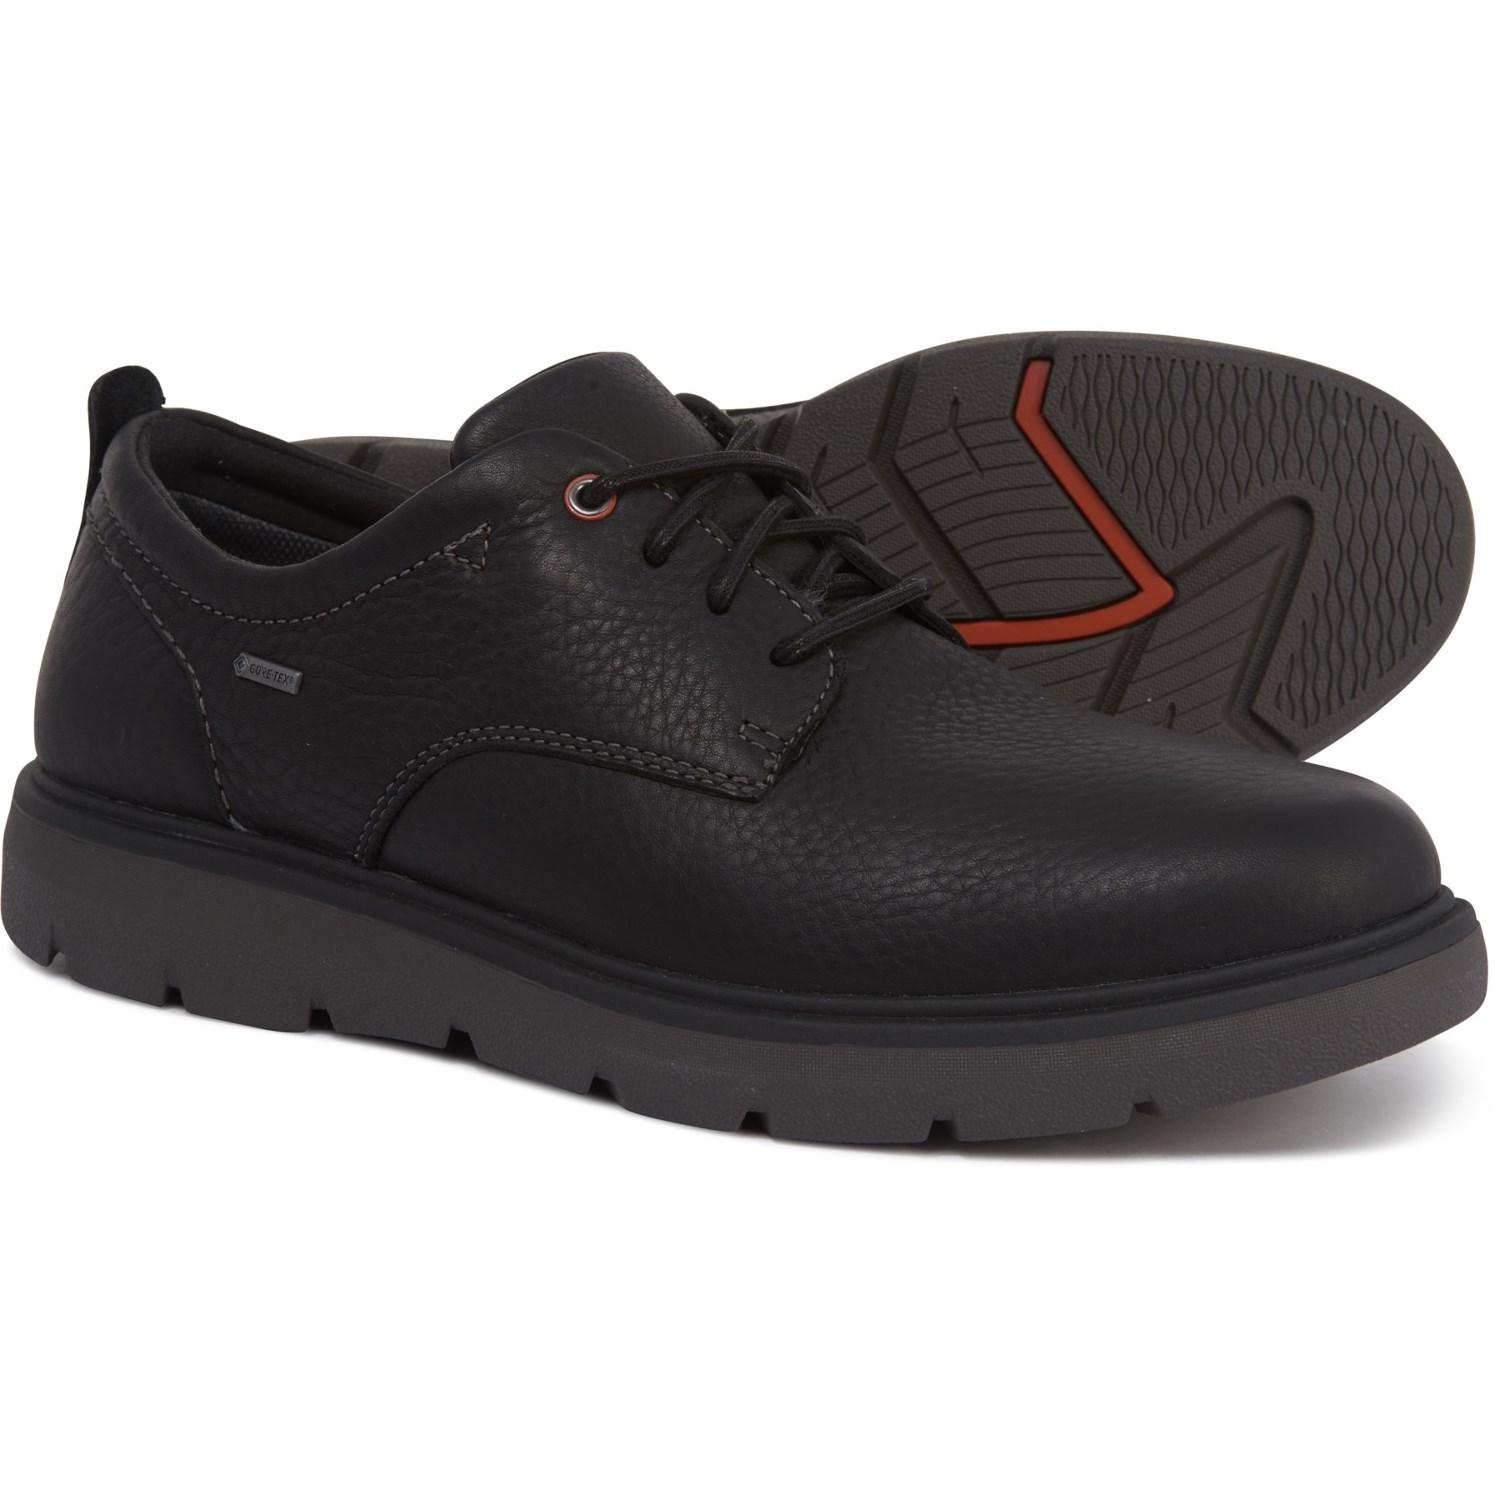 Clarks Un Map Lo Gore-tex(r) Oxford Shoes in Black for Men - Lyst